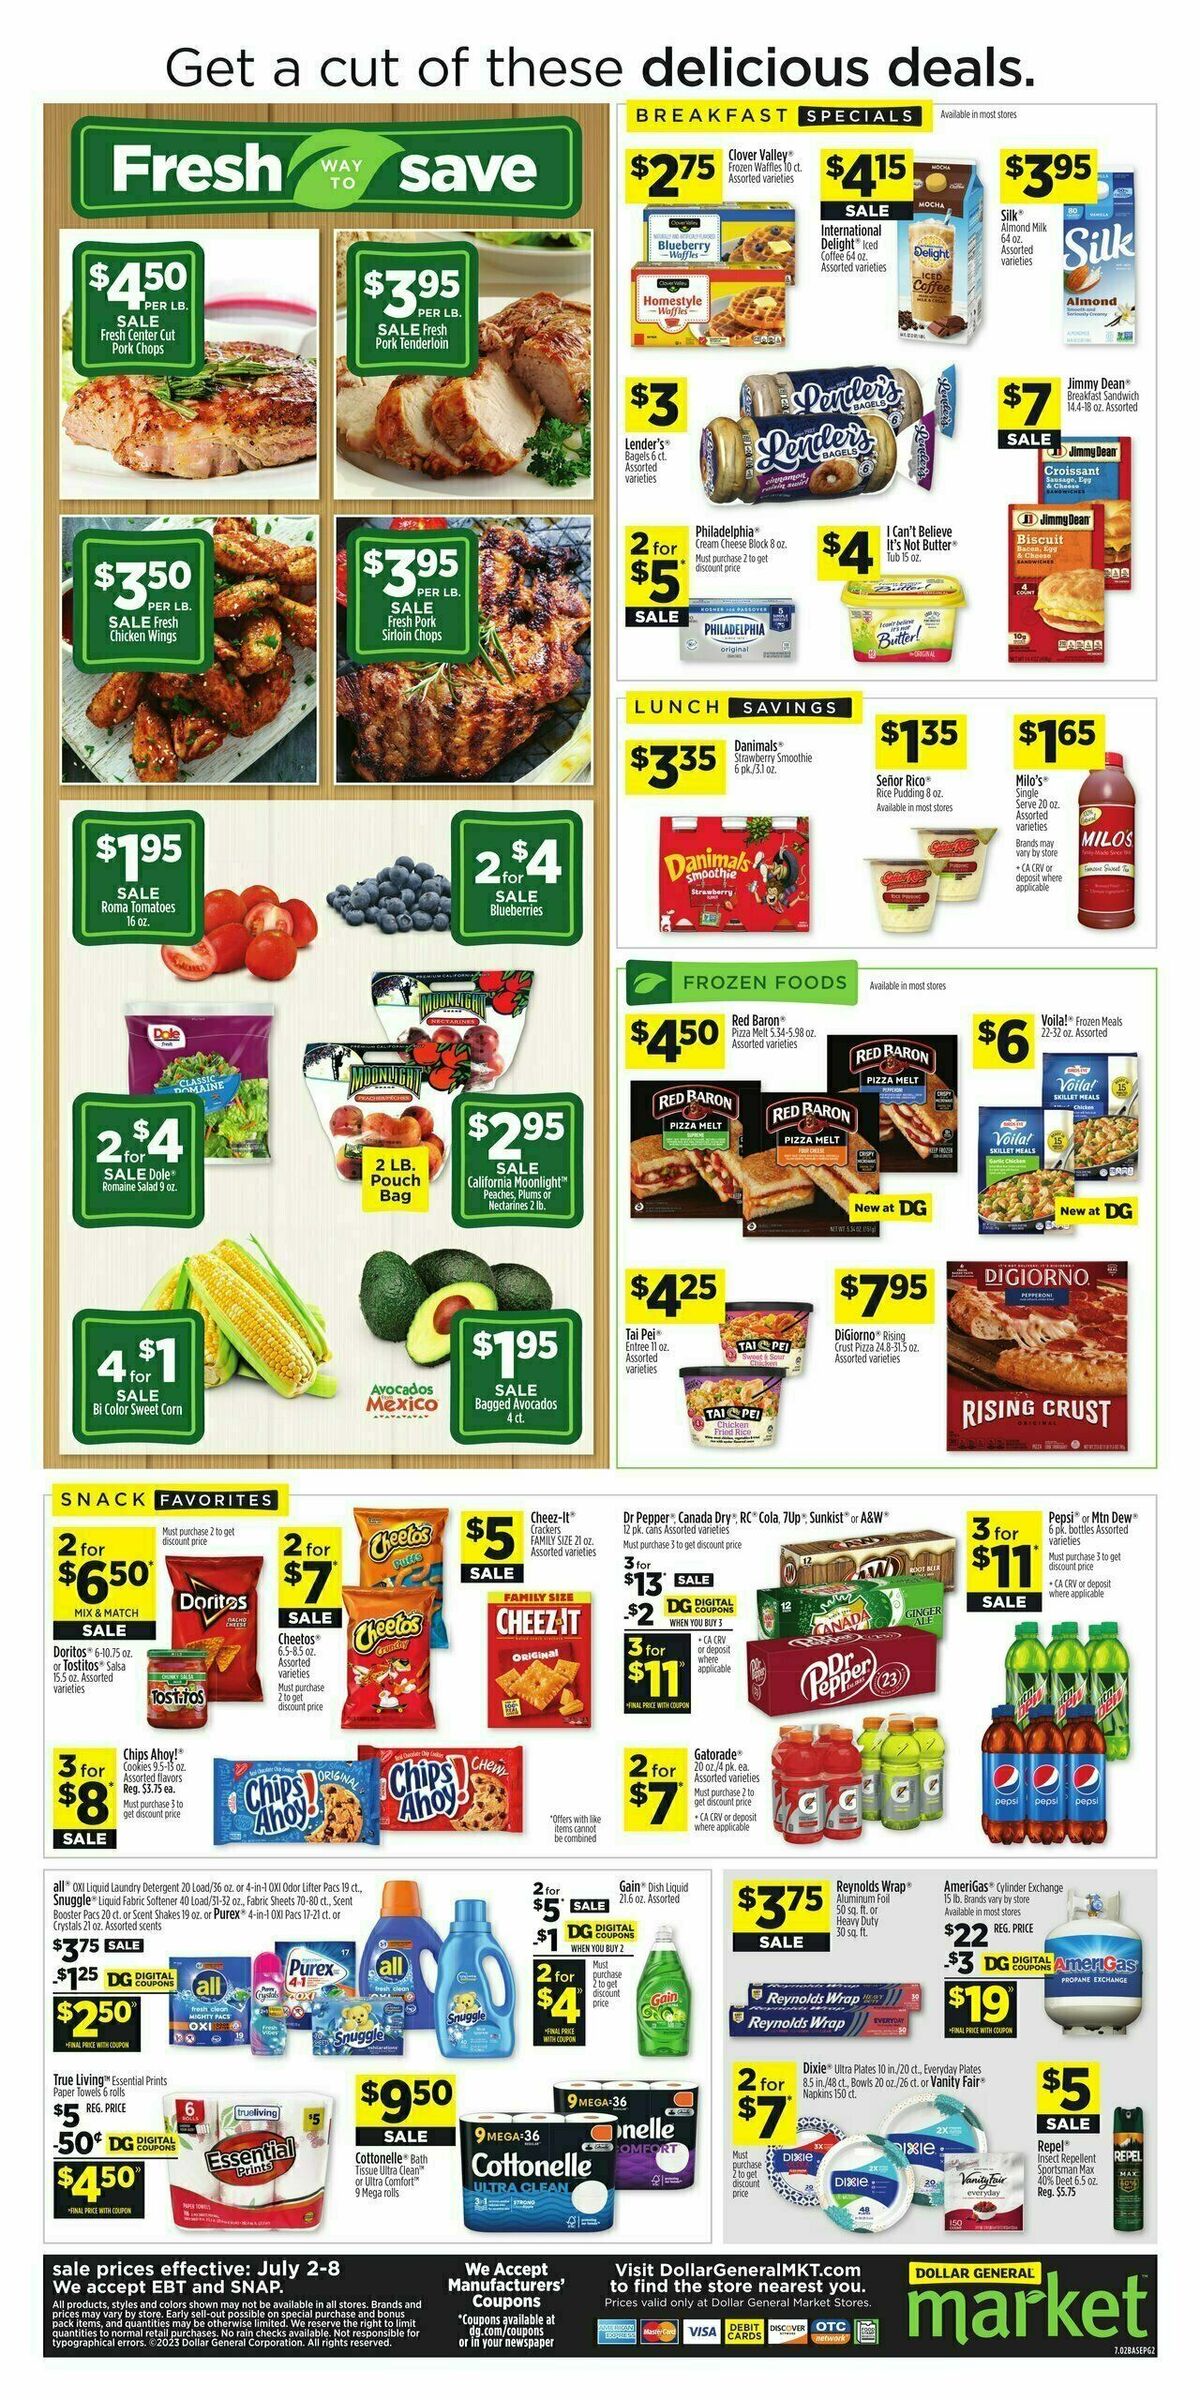 Dollar General Market Ad Weekly Ad from July 2